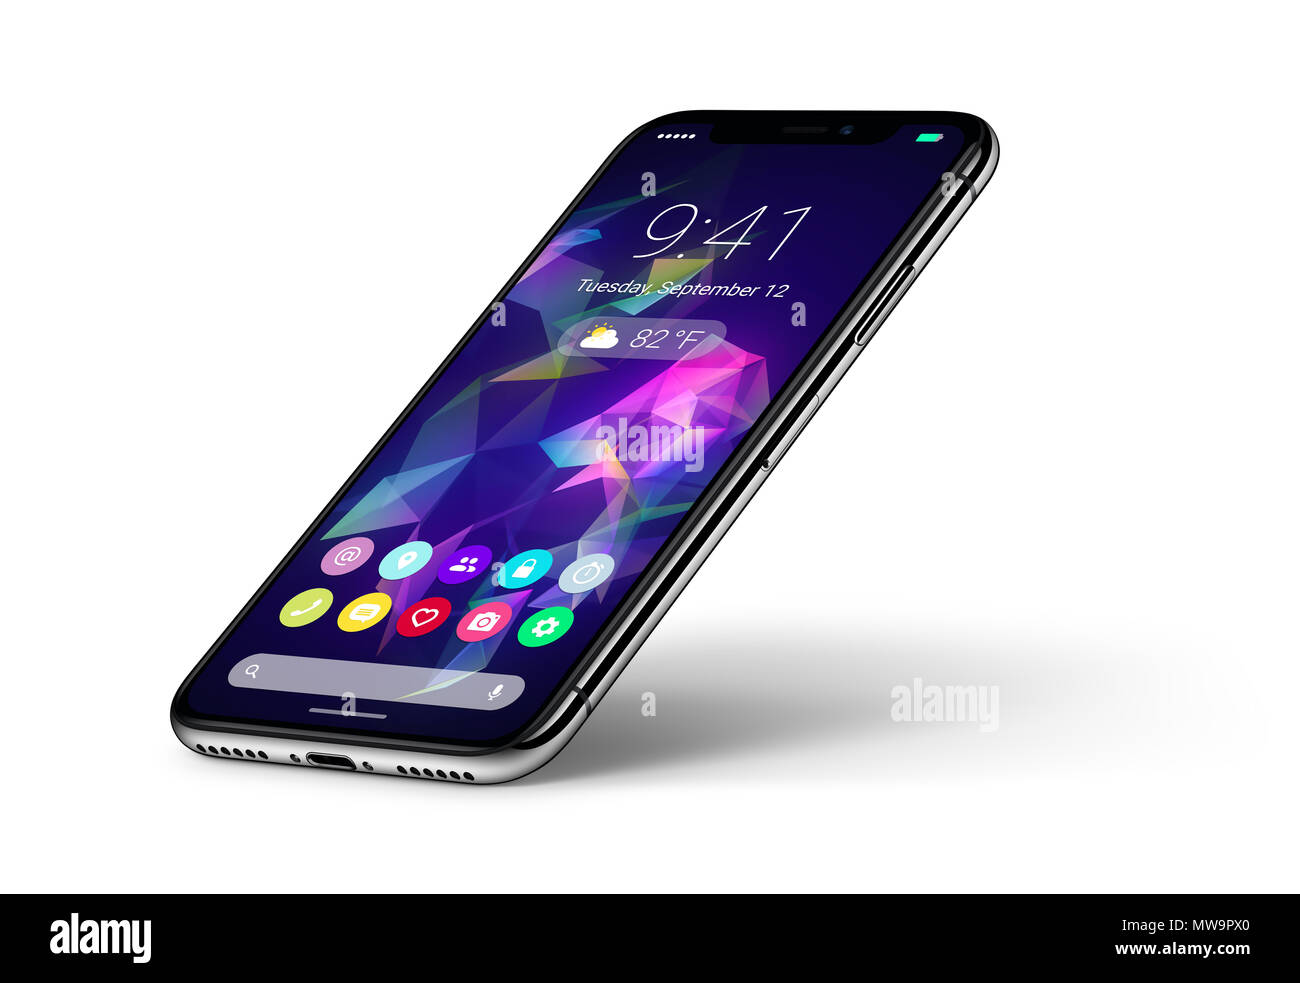 Perspective veiw smartphone concept with material design flat UI interface similar to Android P. Stock Photo